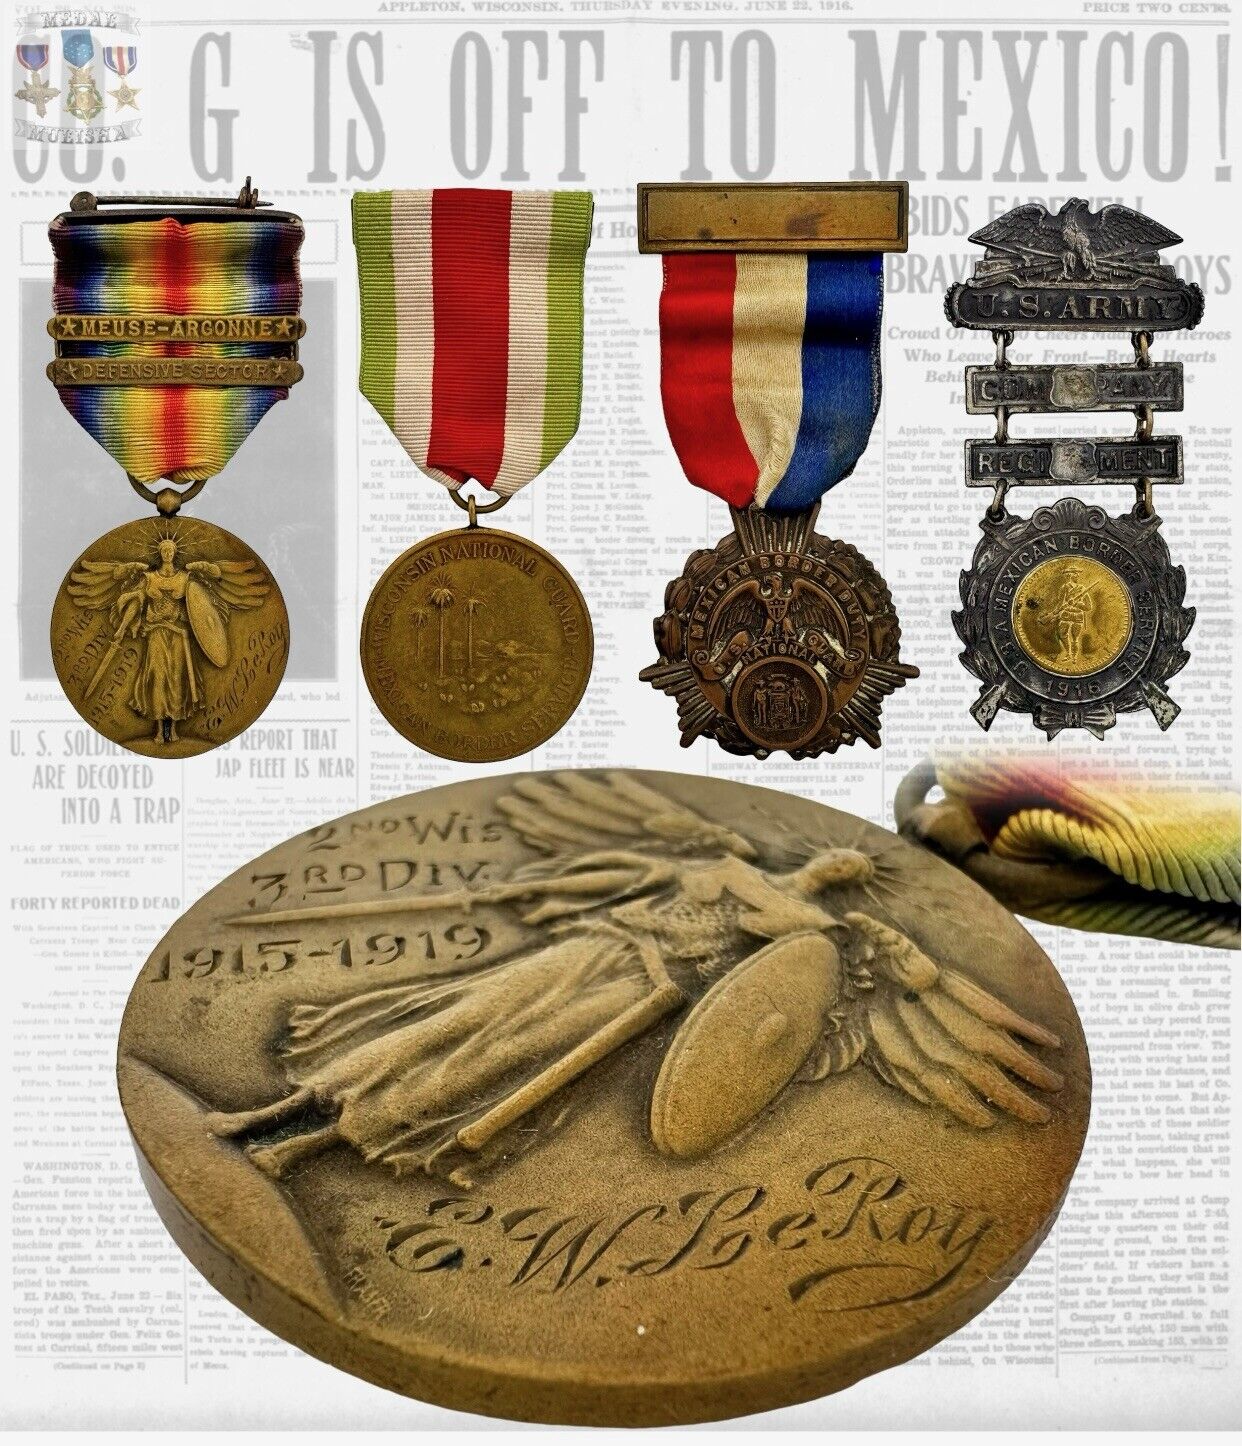 NAMED WWI ARMY VICTORY MEDAL GROUP SGT. MAJOR EMMONS W. LEROY ENGRAVED +RESEARCH